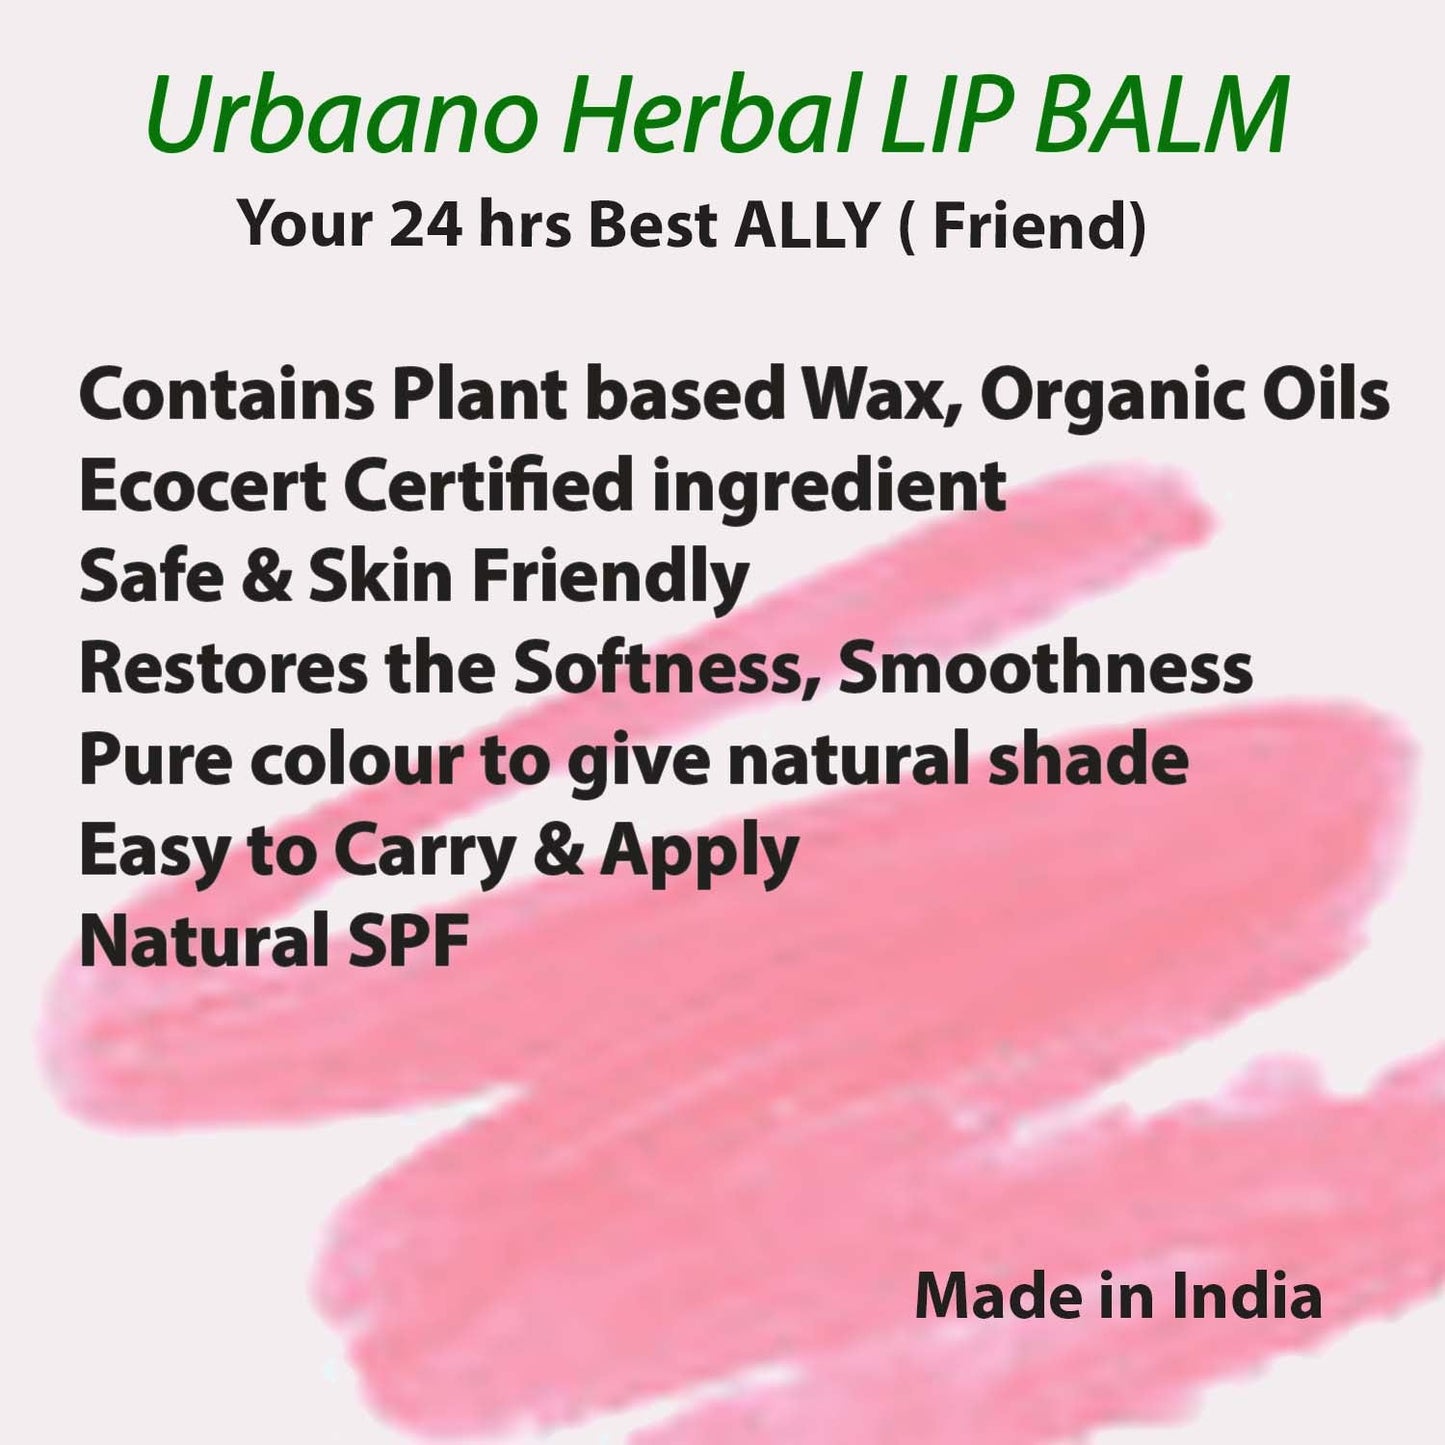 urbaano herbal your best ally lip balm safe, easy use with natural plant based vegan  actives